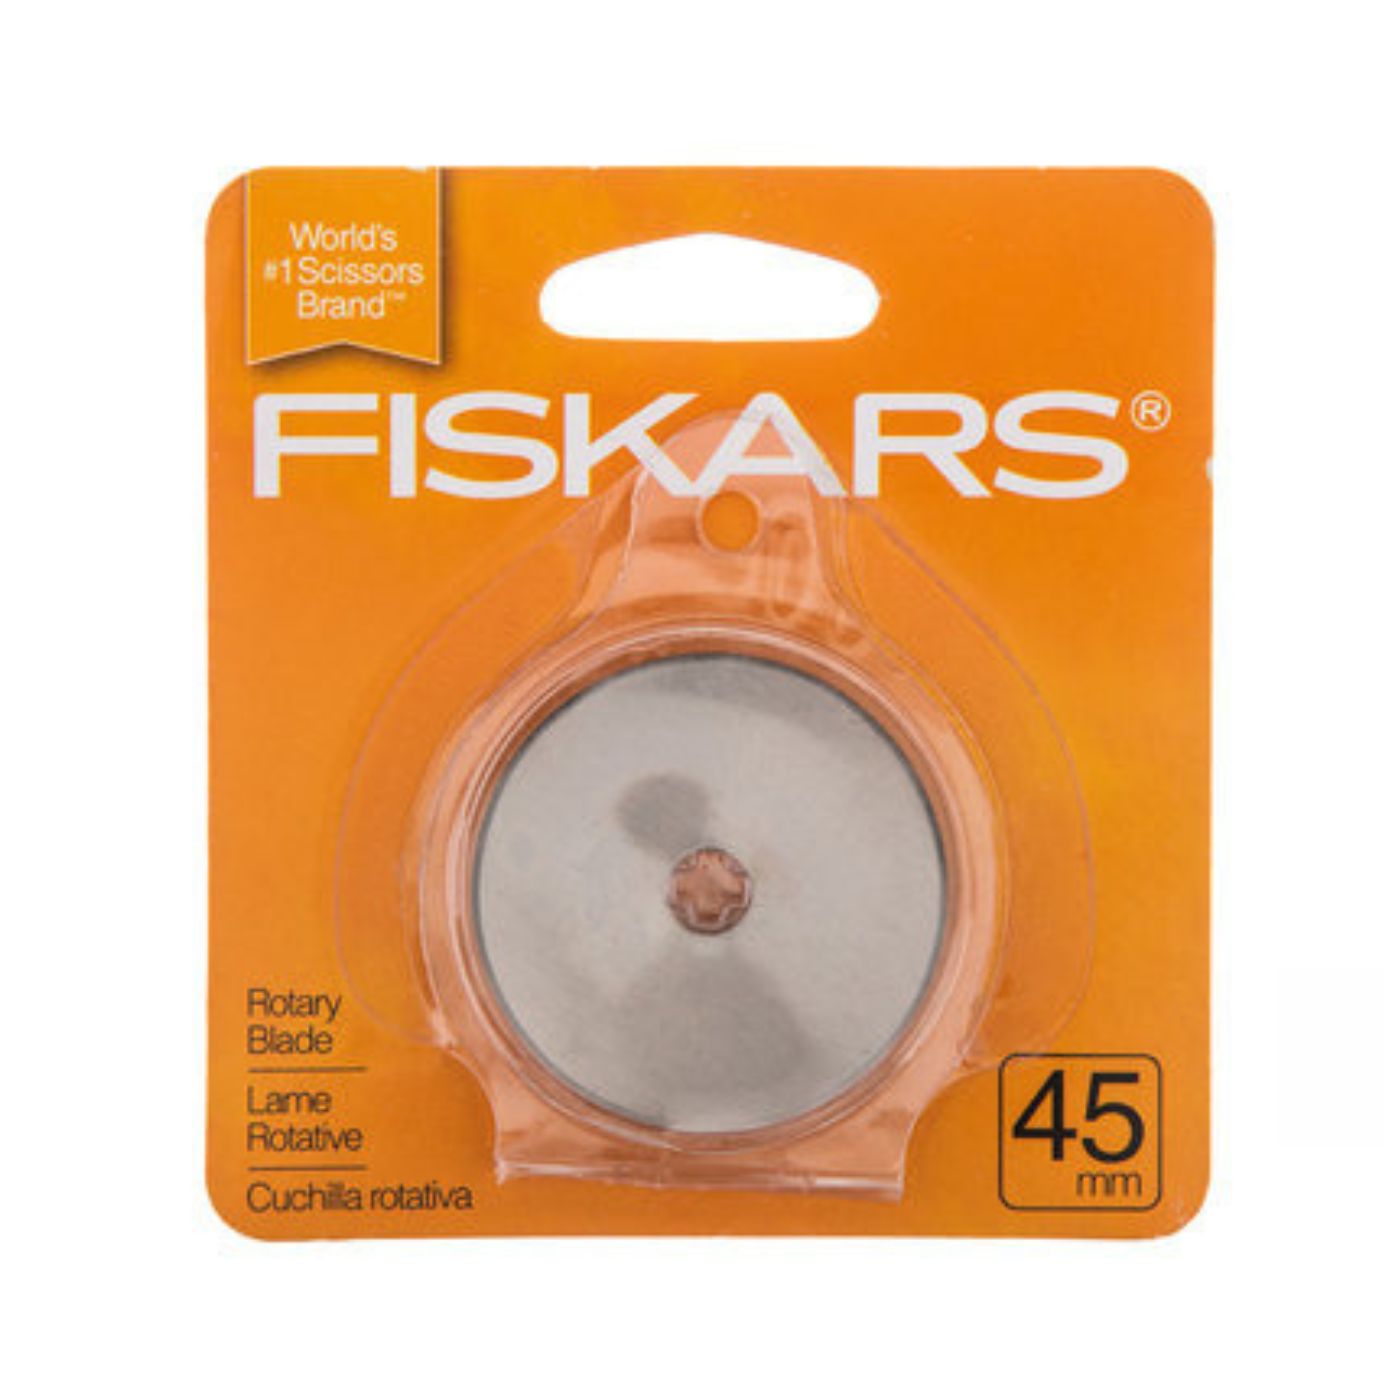 Fiskars Replacement Blade Scoring for Rotary Trimmer 45mm